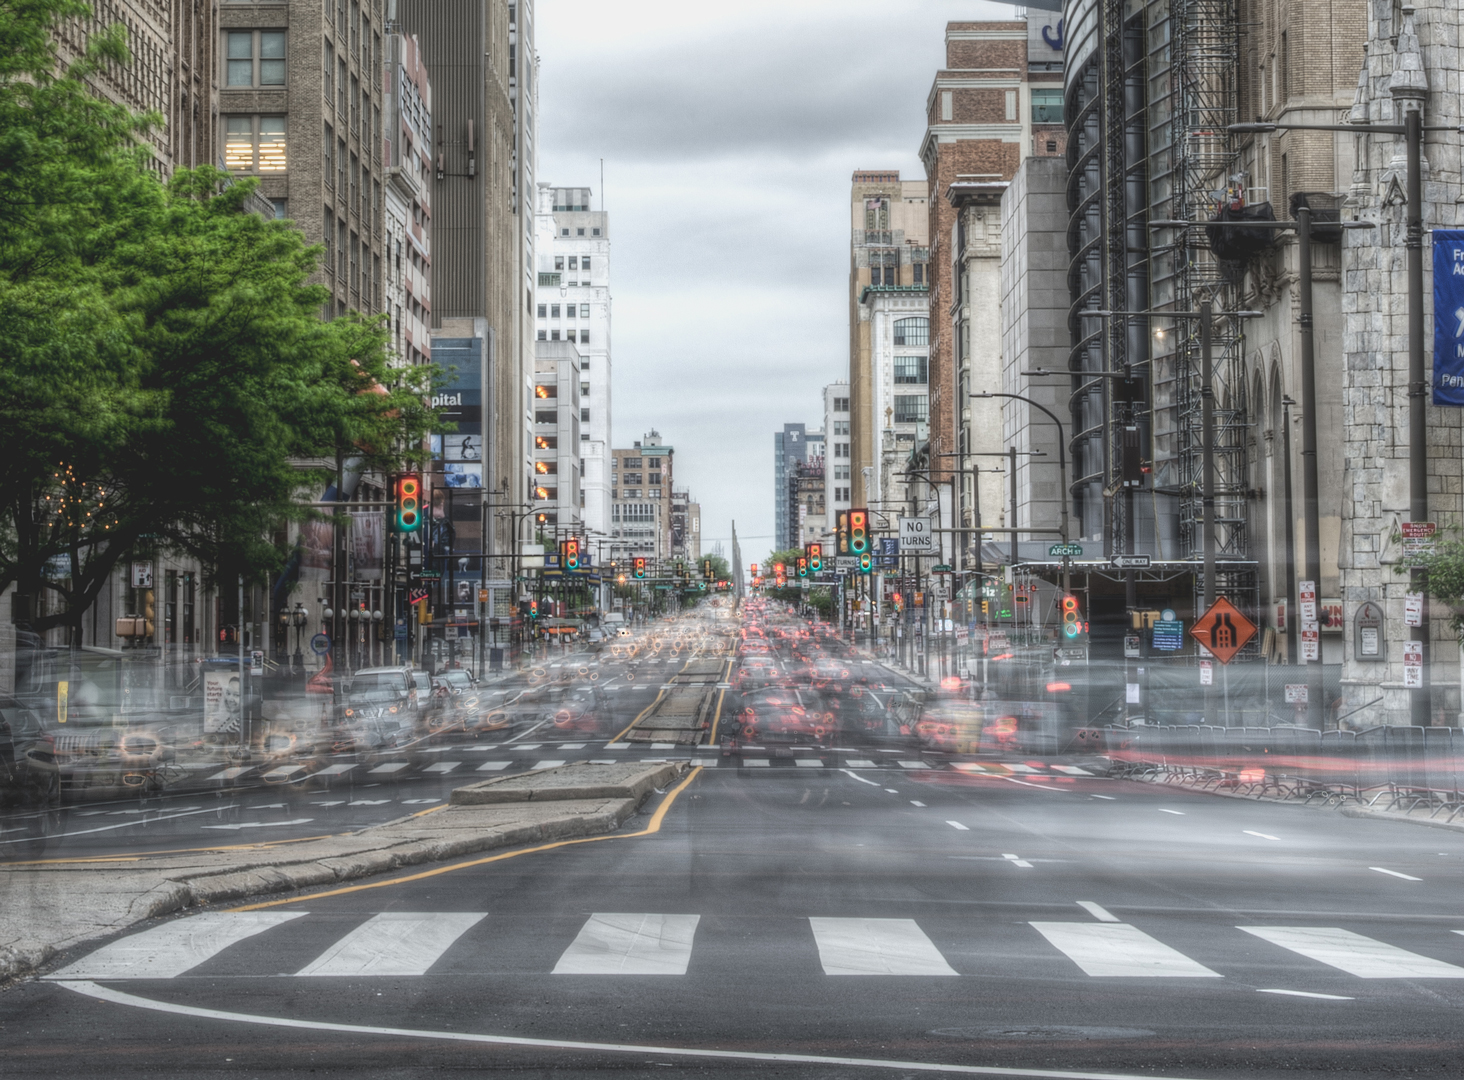 Will human drivers soon be a thing of the past? (Source: unsplash.com)